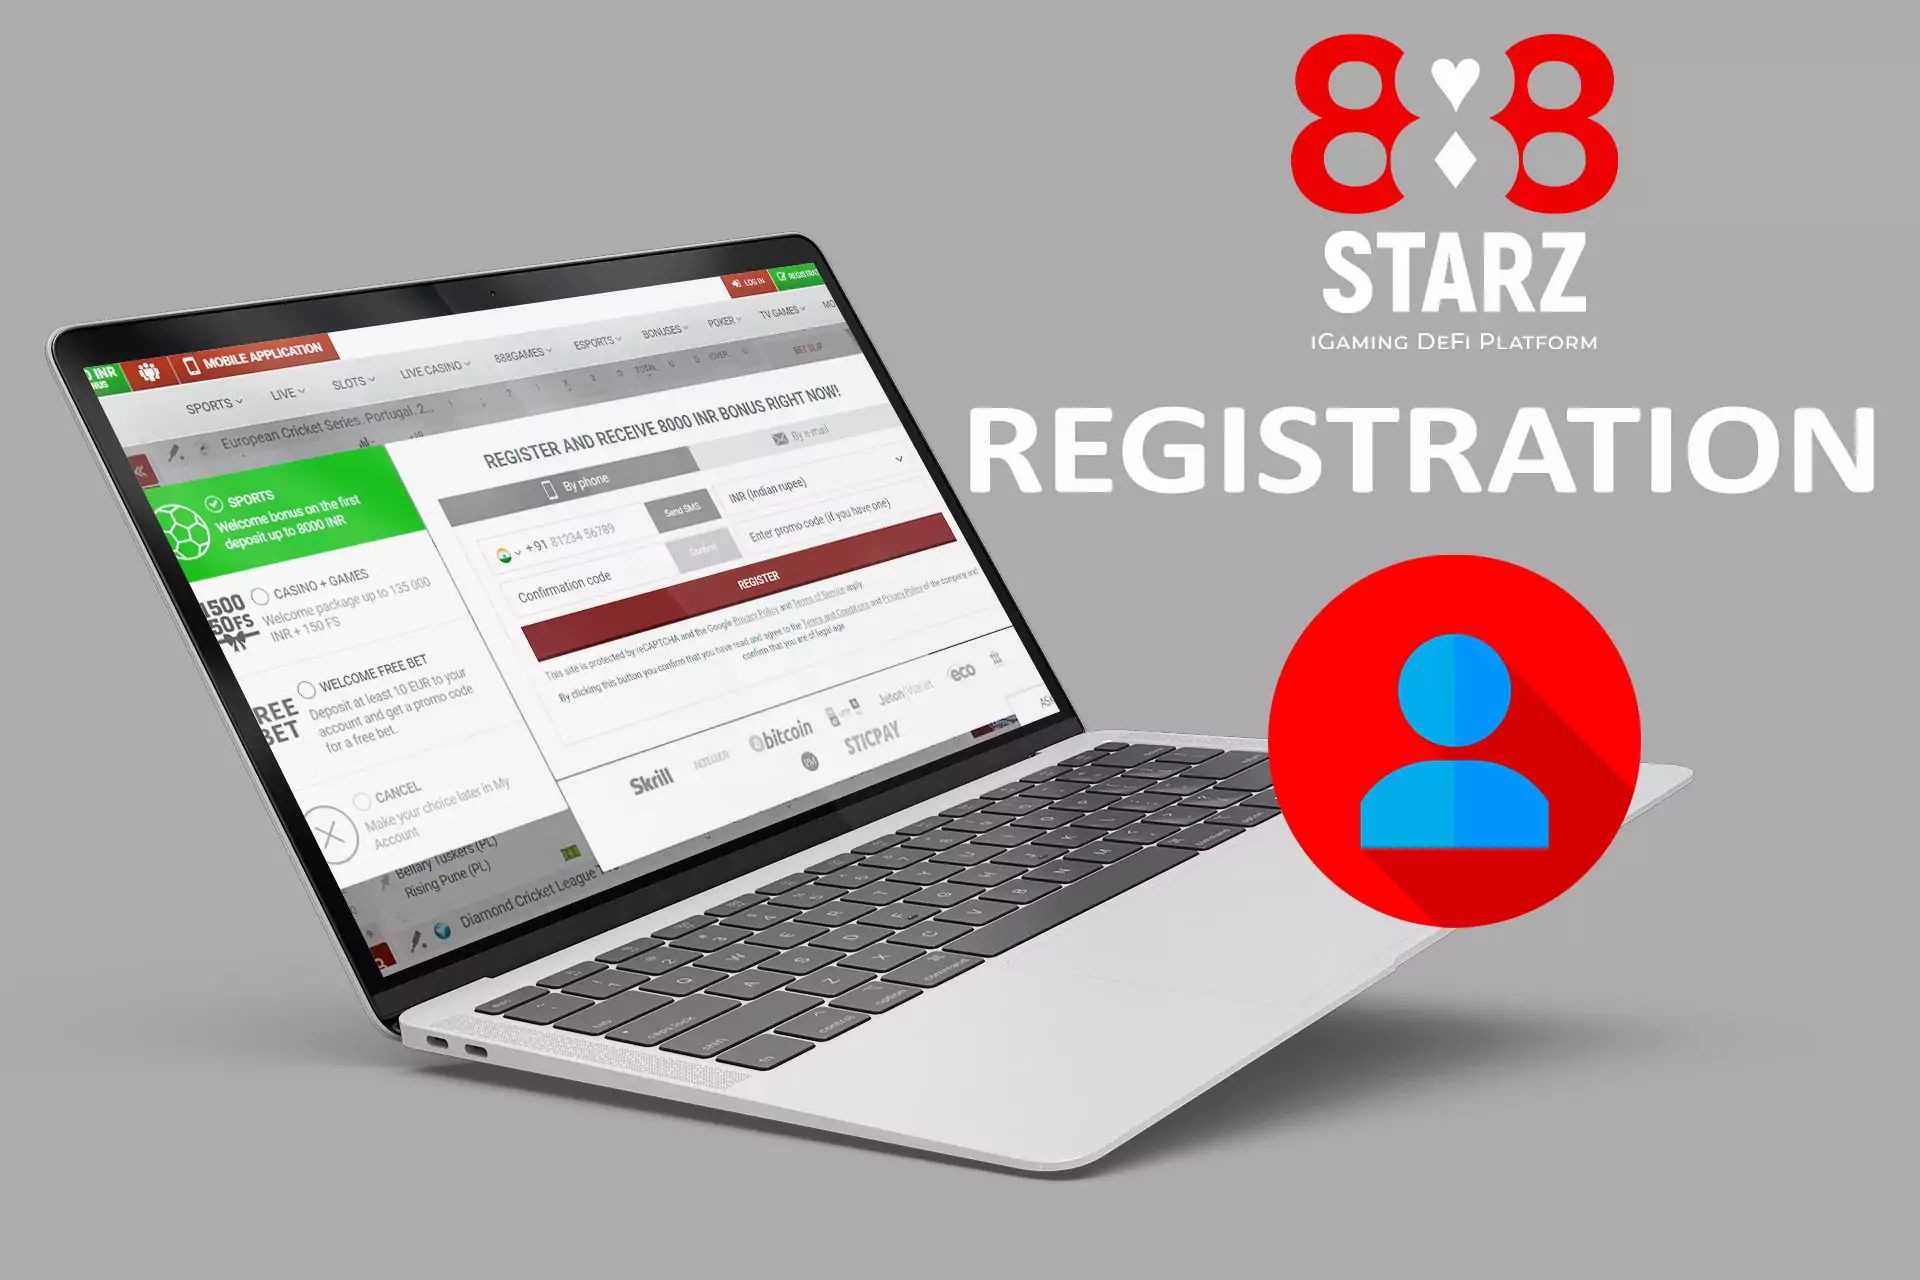 Register with 888starz for online betting.